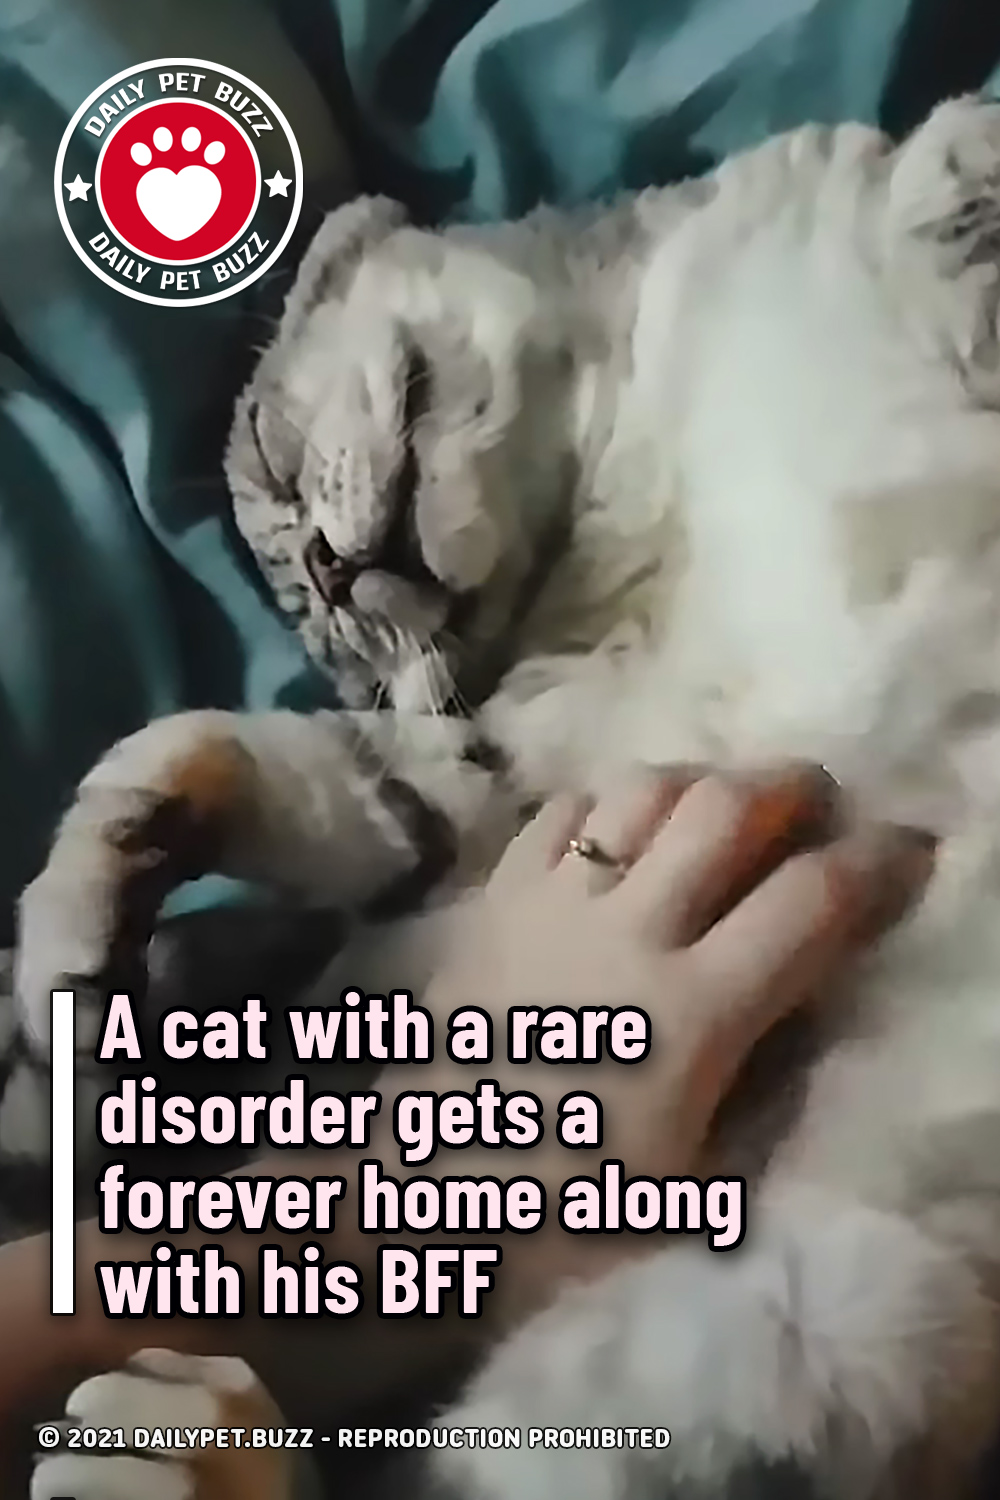 A cat with a rare disorder gets a forever home along with his BFF